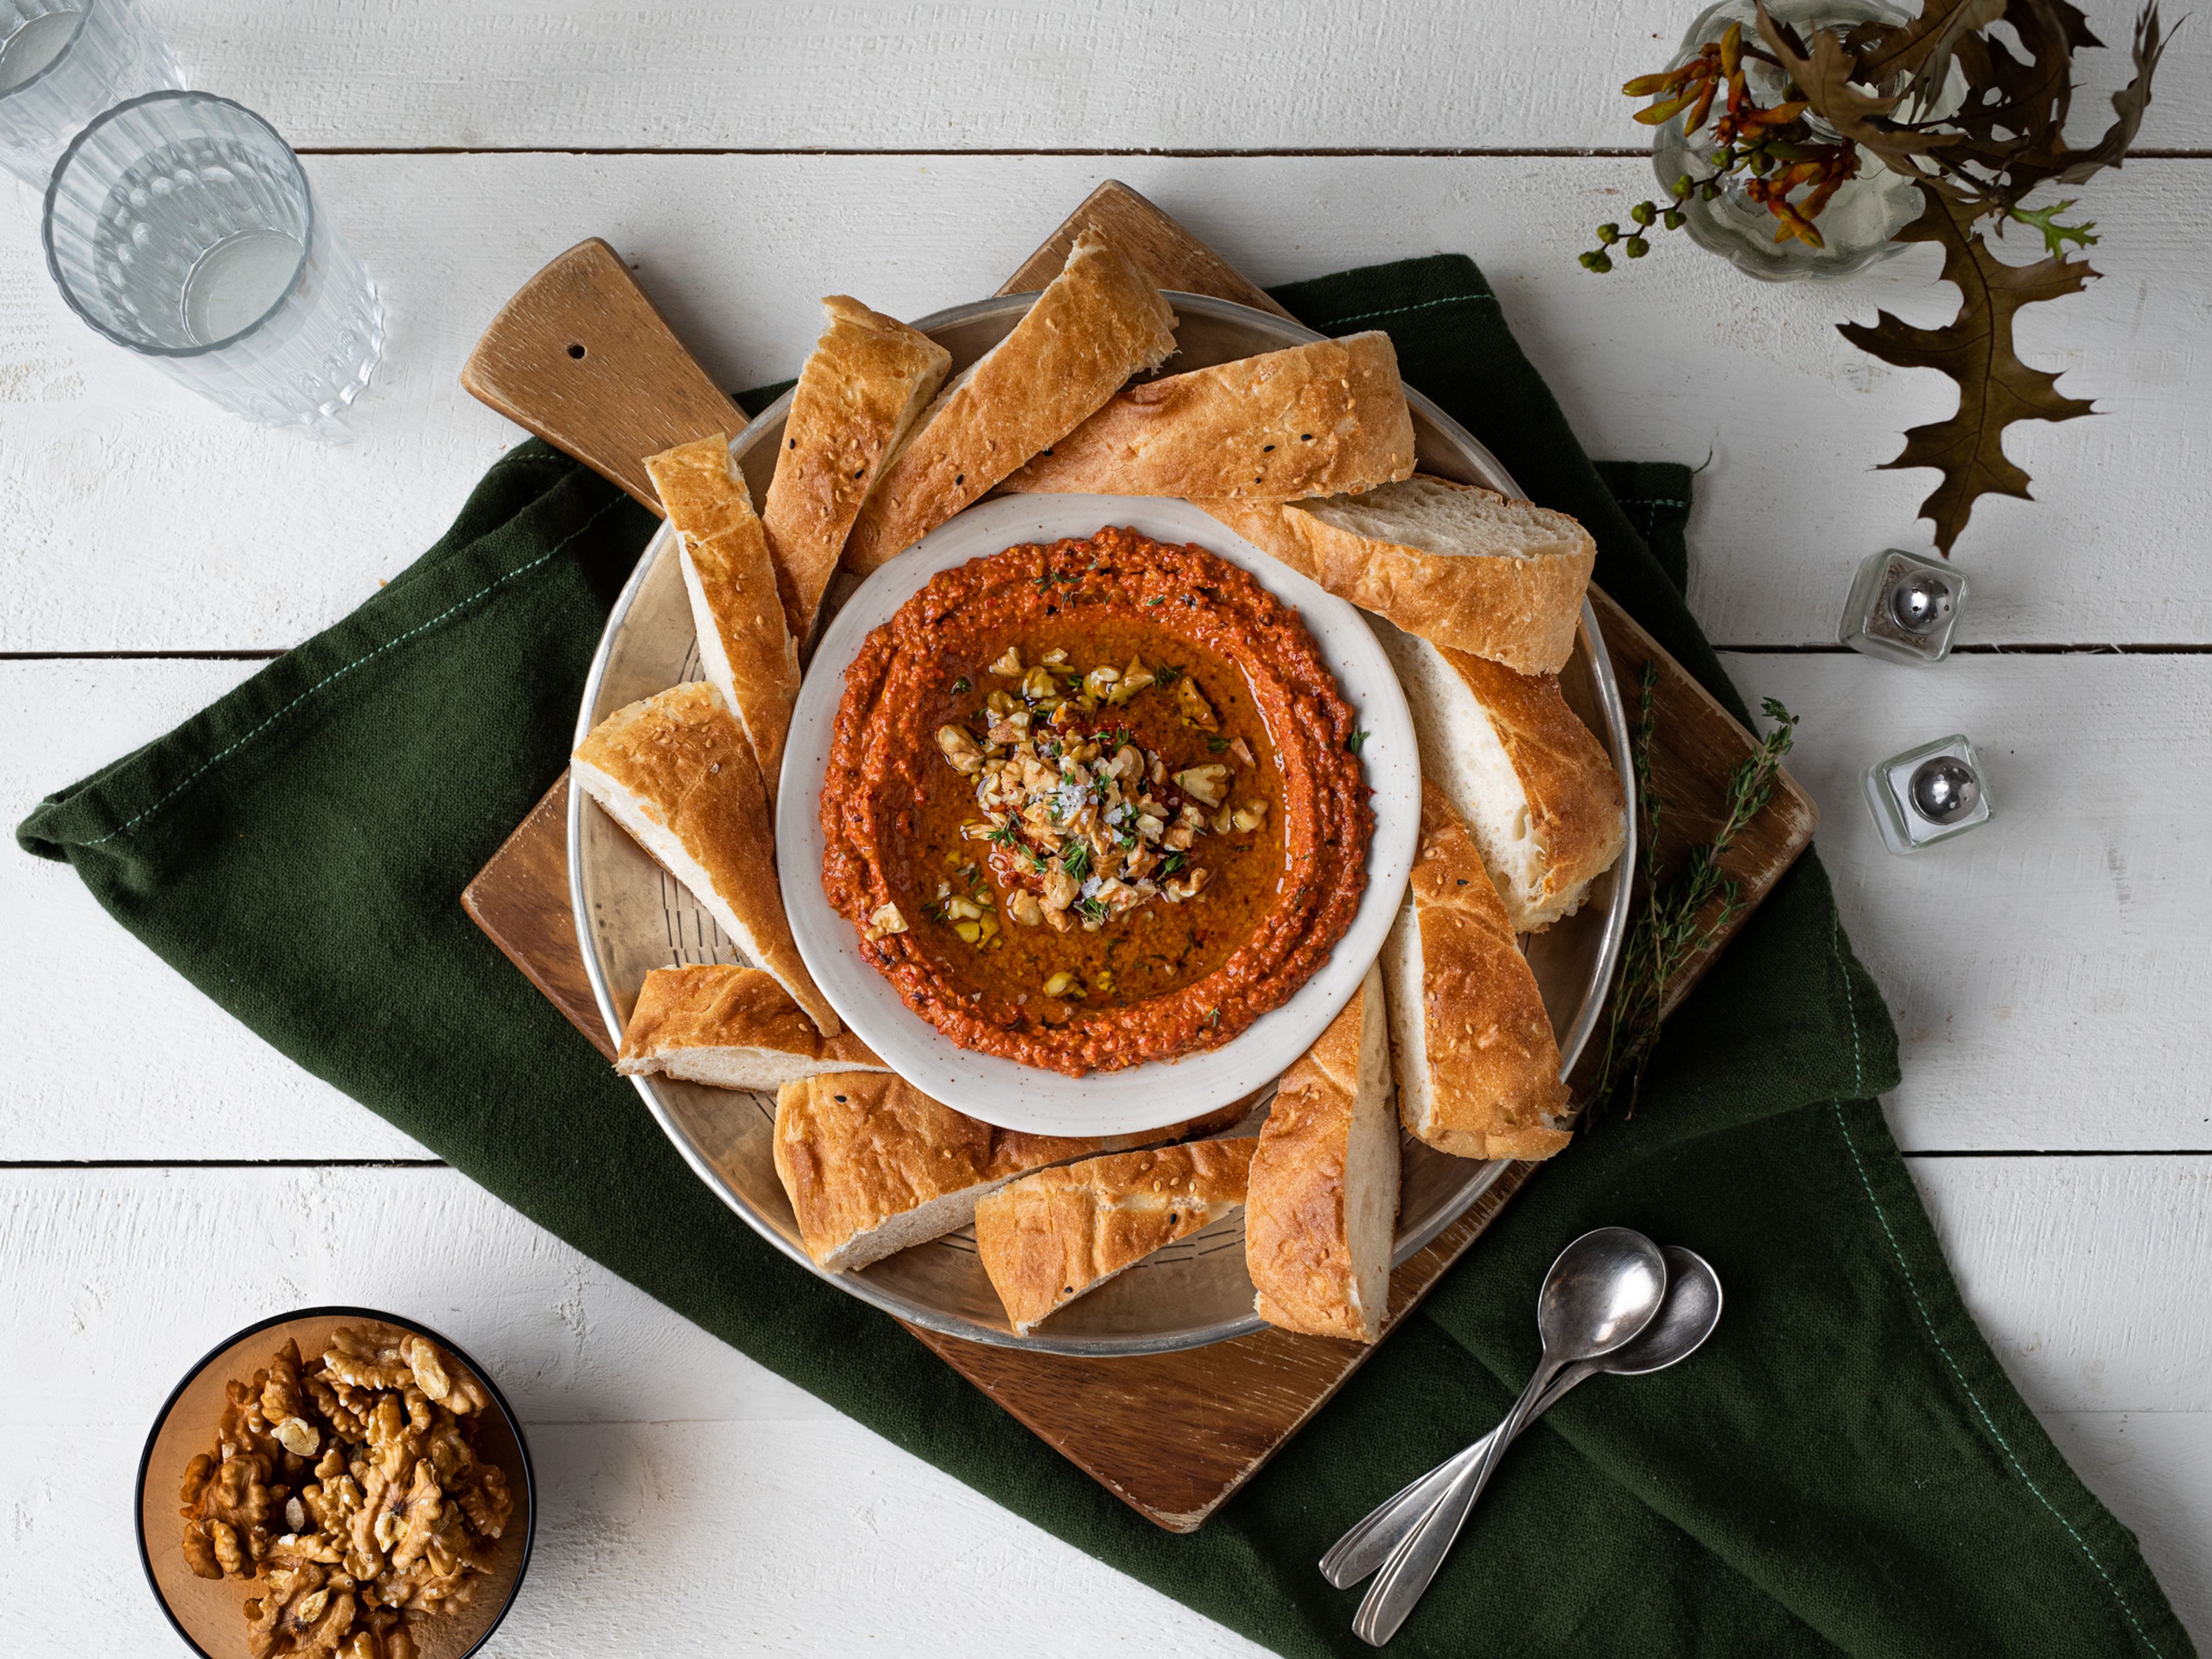 Muhammara (Middle Eastern walnut and roasted bell pepper dip)